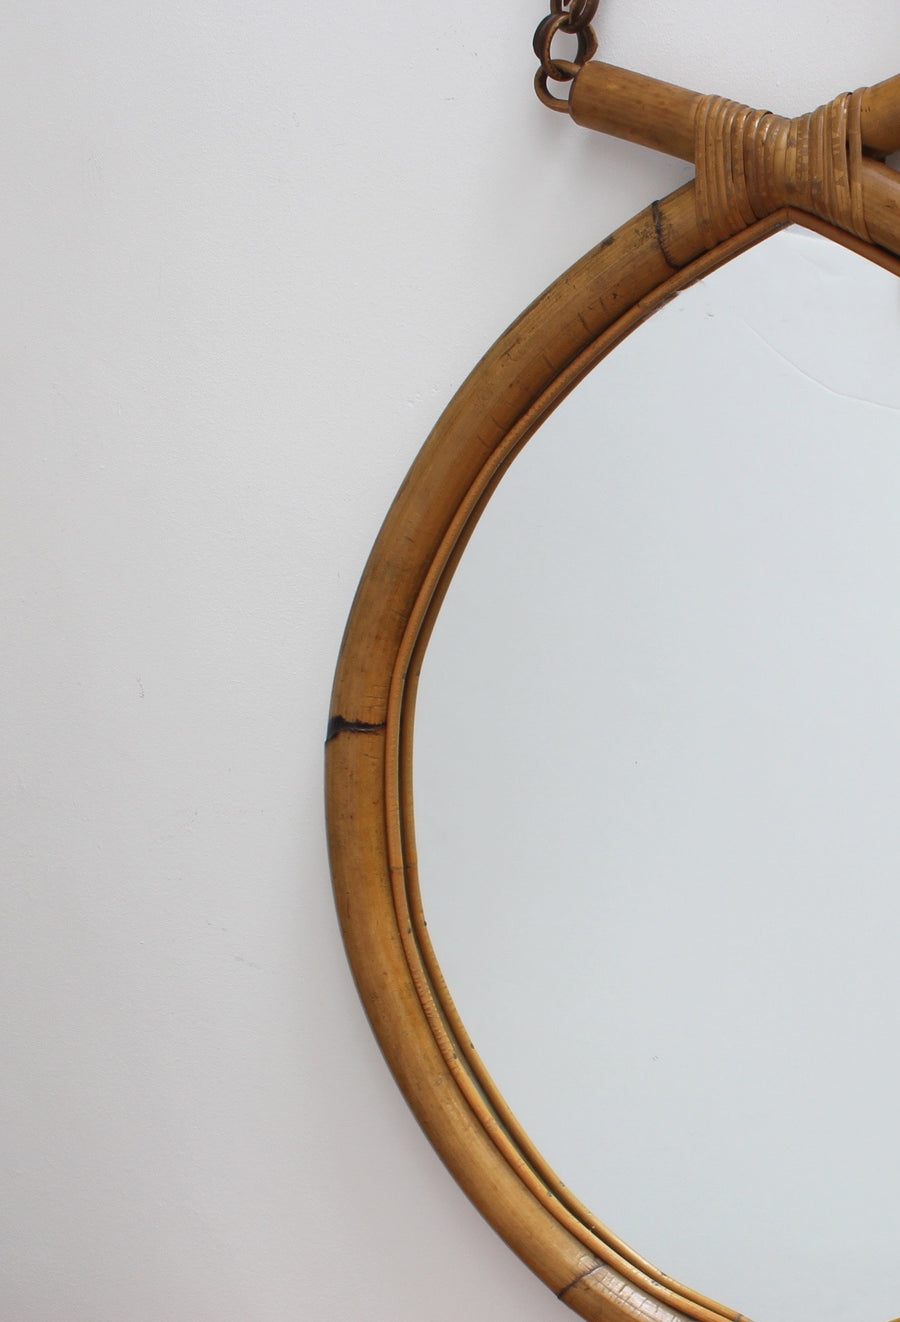 Italian 'Eye-Shaped' Style Bamboo and Rattan Mirror with Hanging Chain (circa 1960s)